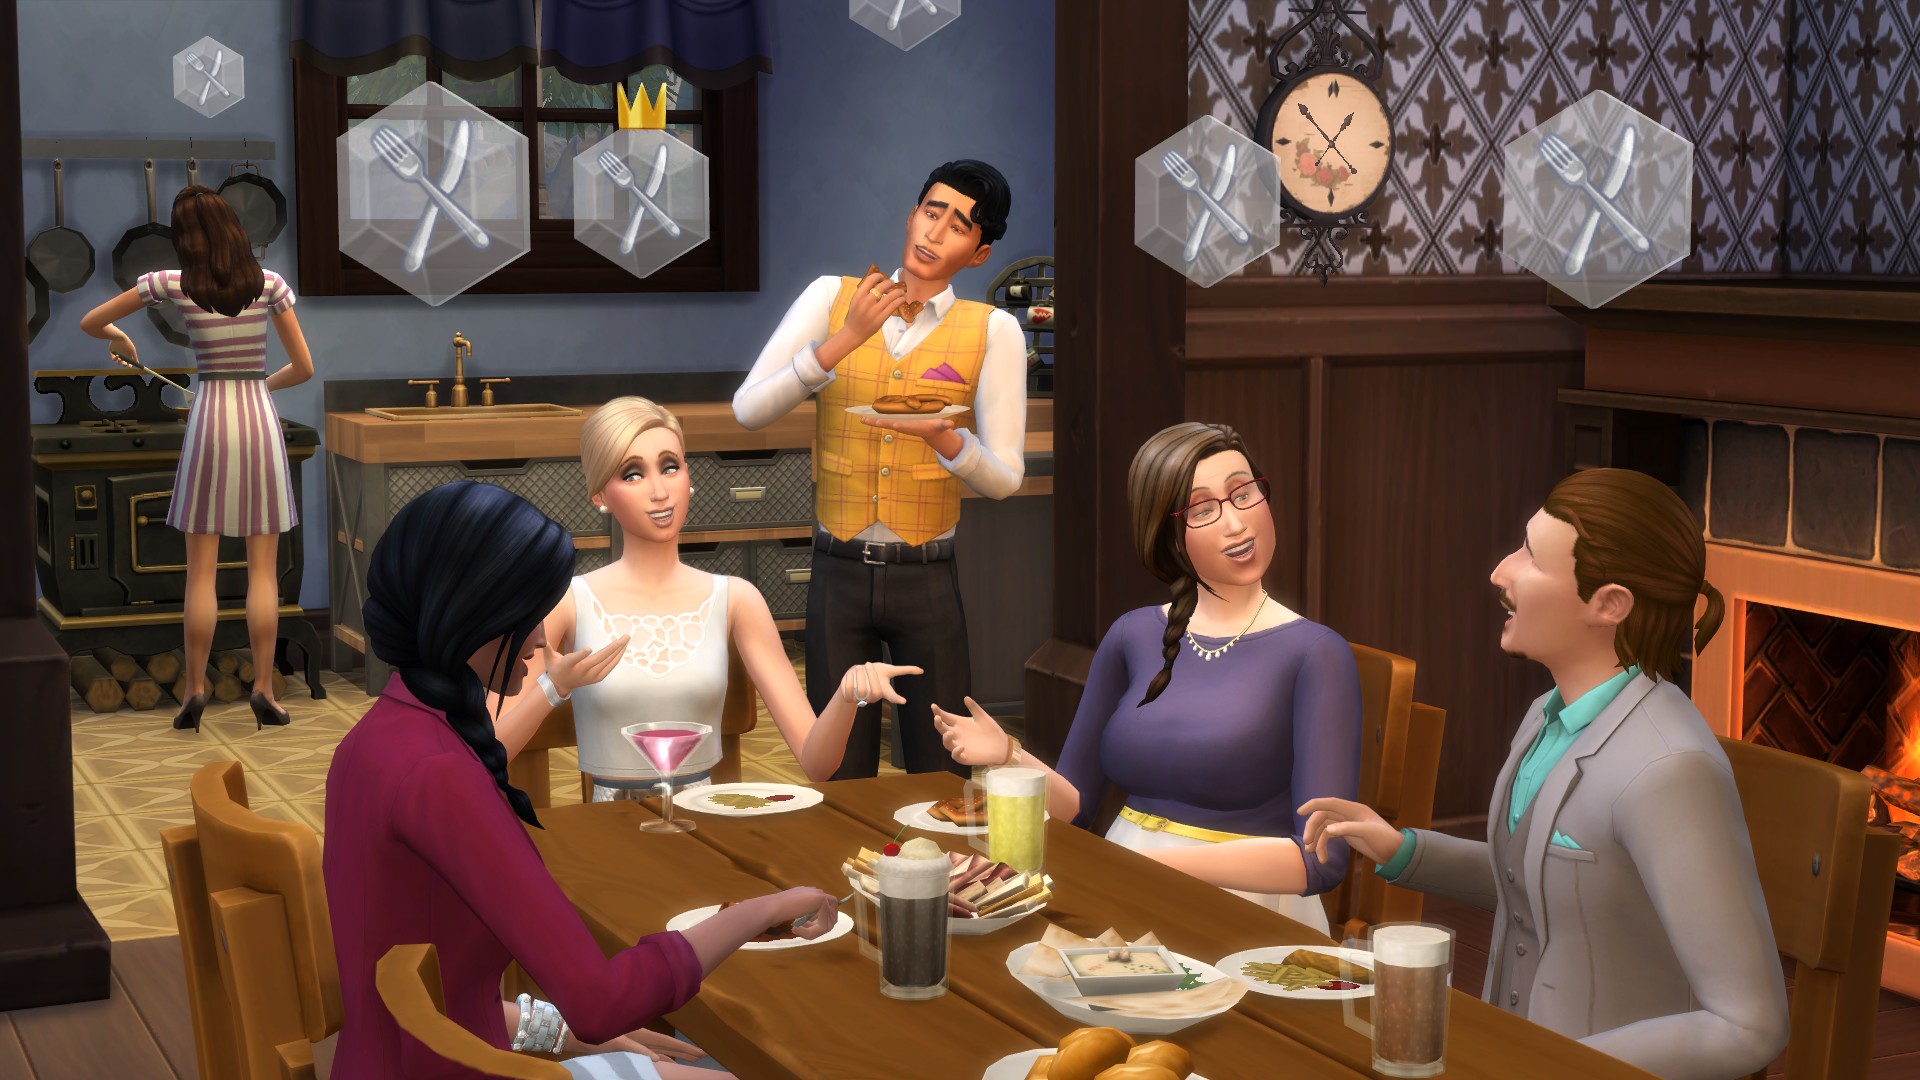 The Sims 4 Get Together Screenshot